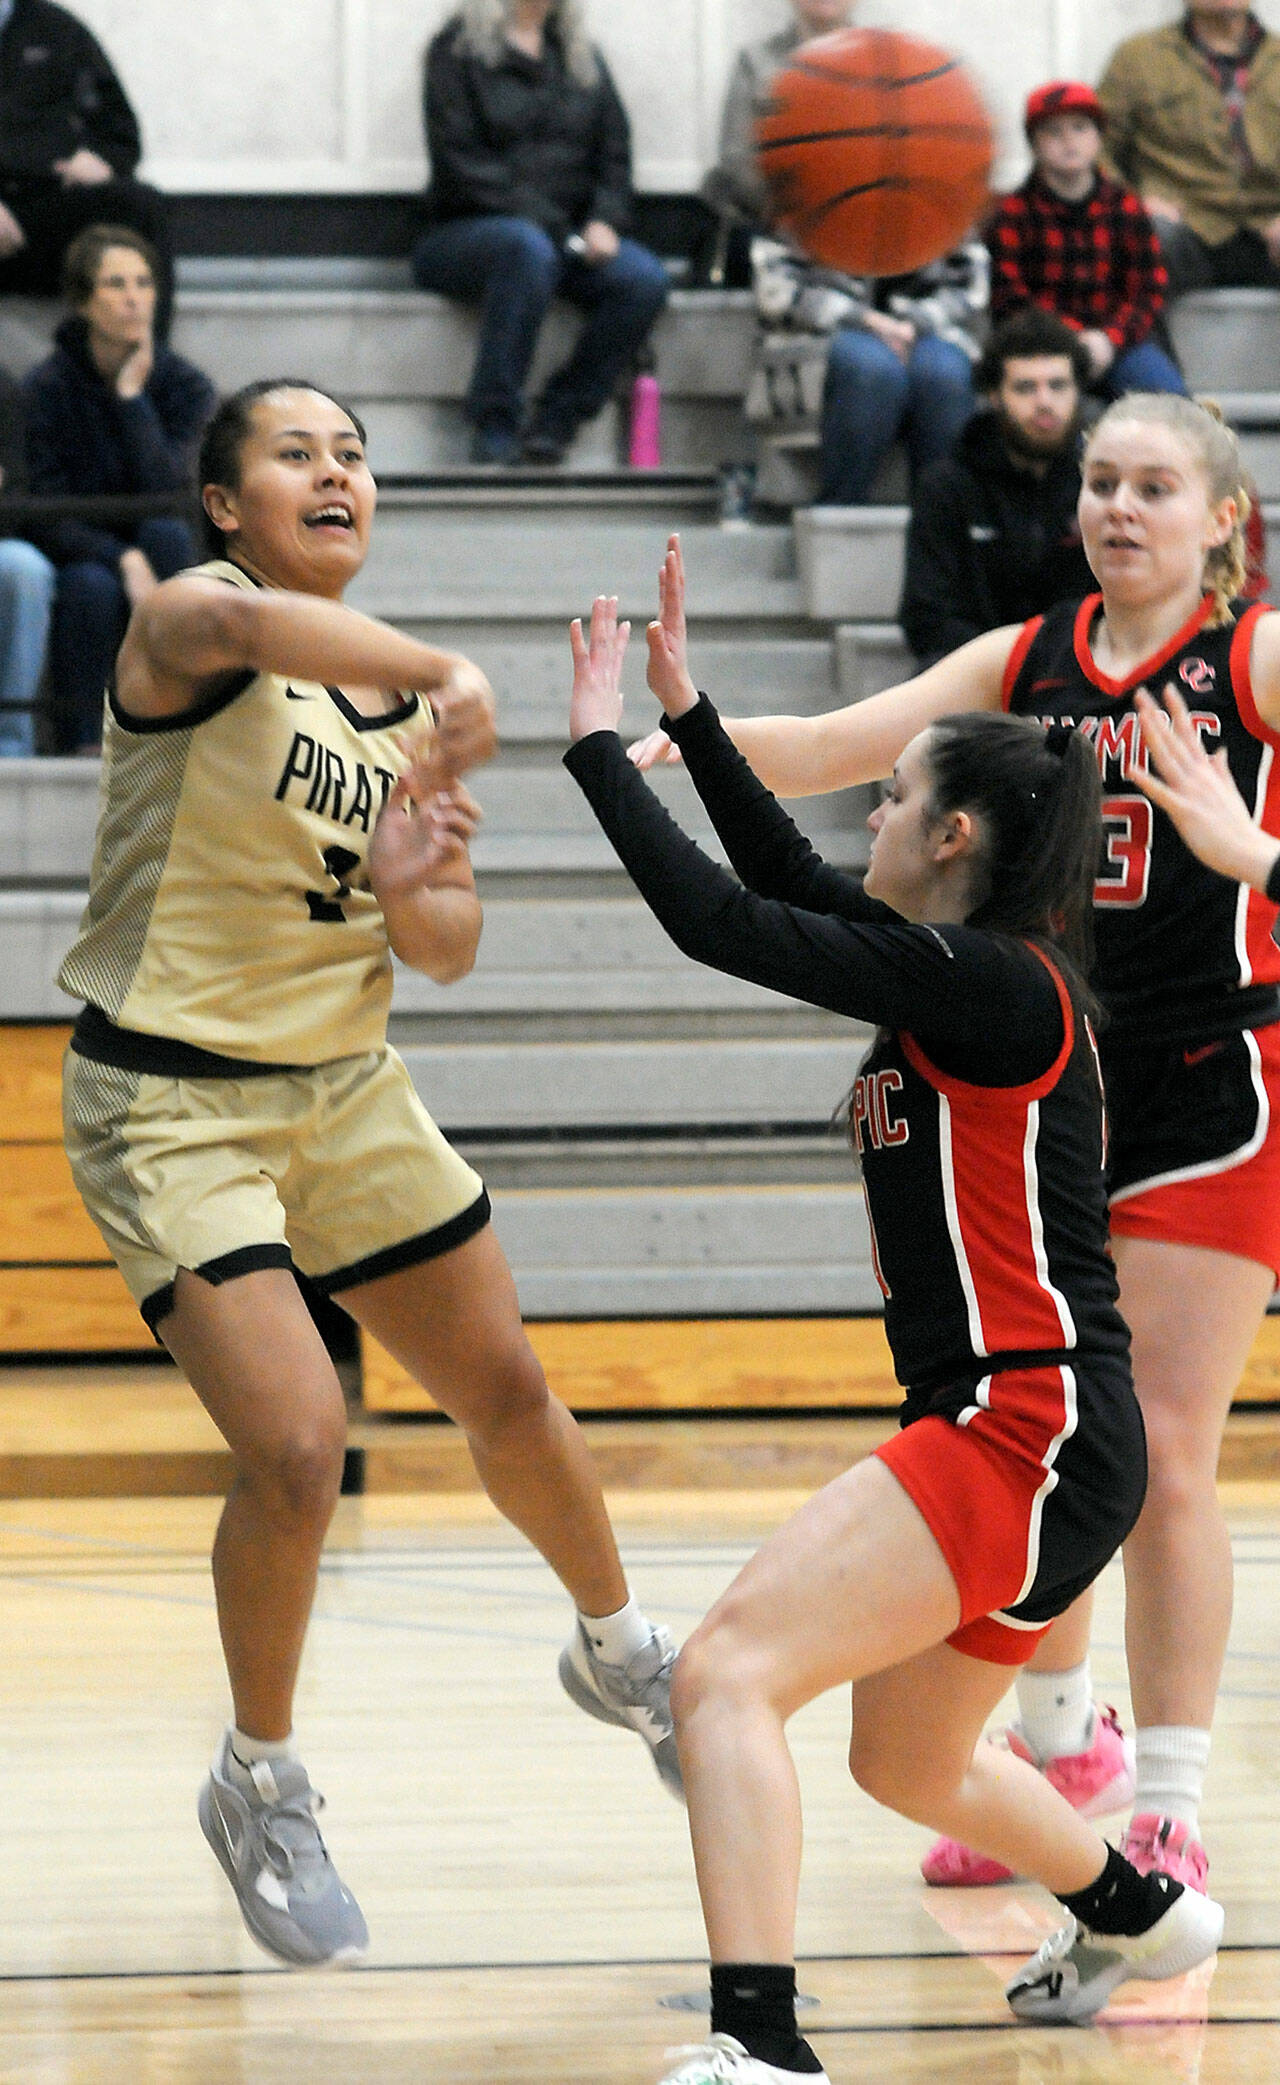 Peninsula’s Tatianna Kamae, left, passes over the head of Olympic’s Madilyn Neil as Olympic’s Alannah Northam looks on at right during Saturday’s game in Port Angeles. (Keith Thorpe/Peninsula Daily News)